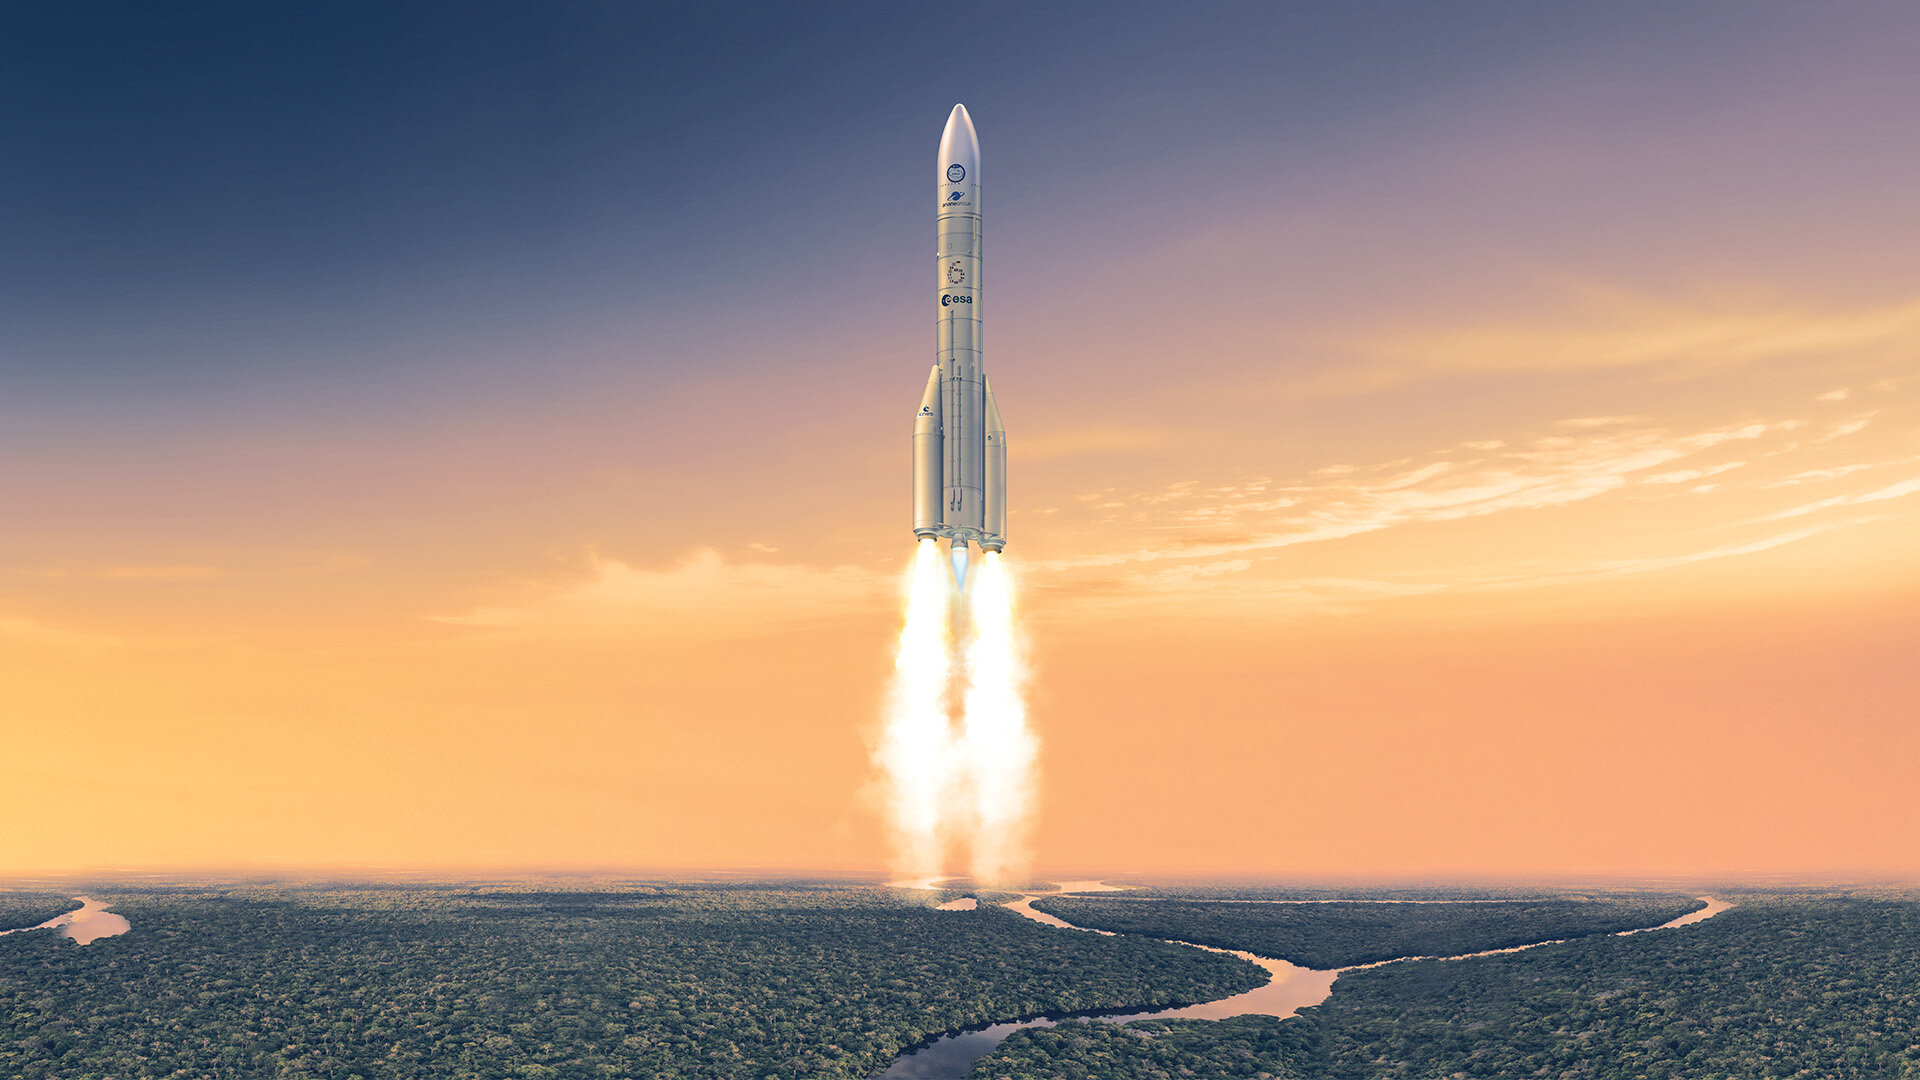 Restoring Europe’s space independence: everything you need to know about the Ariane 6 rocket